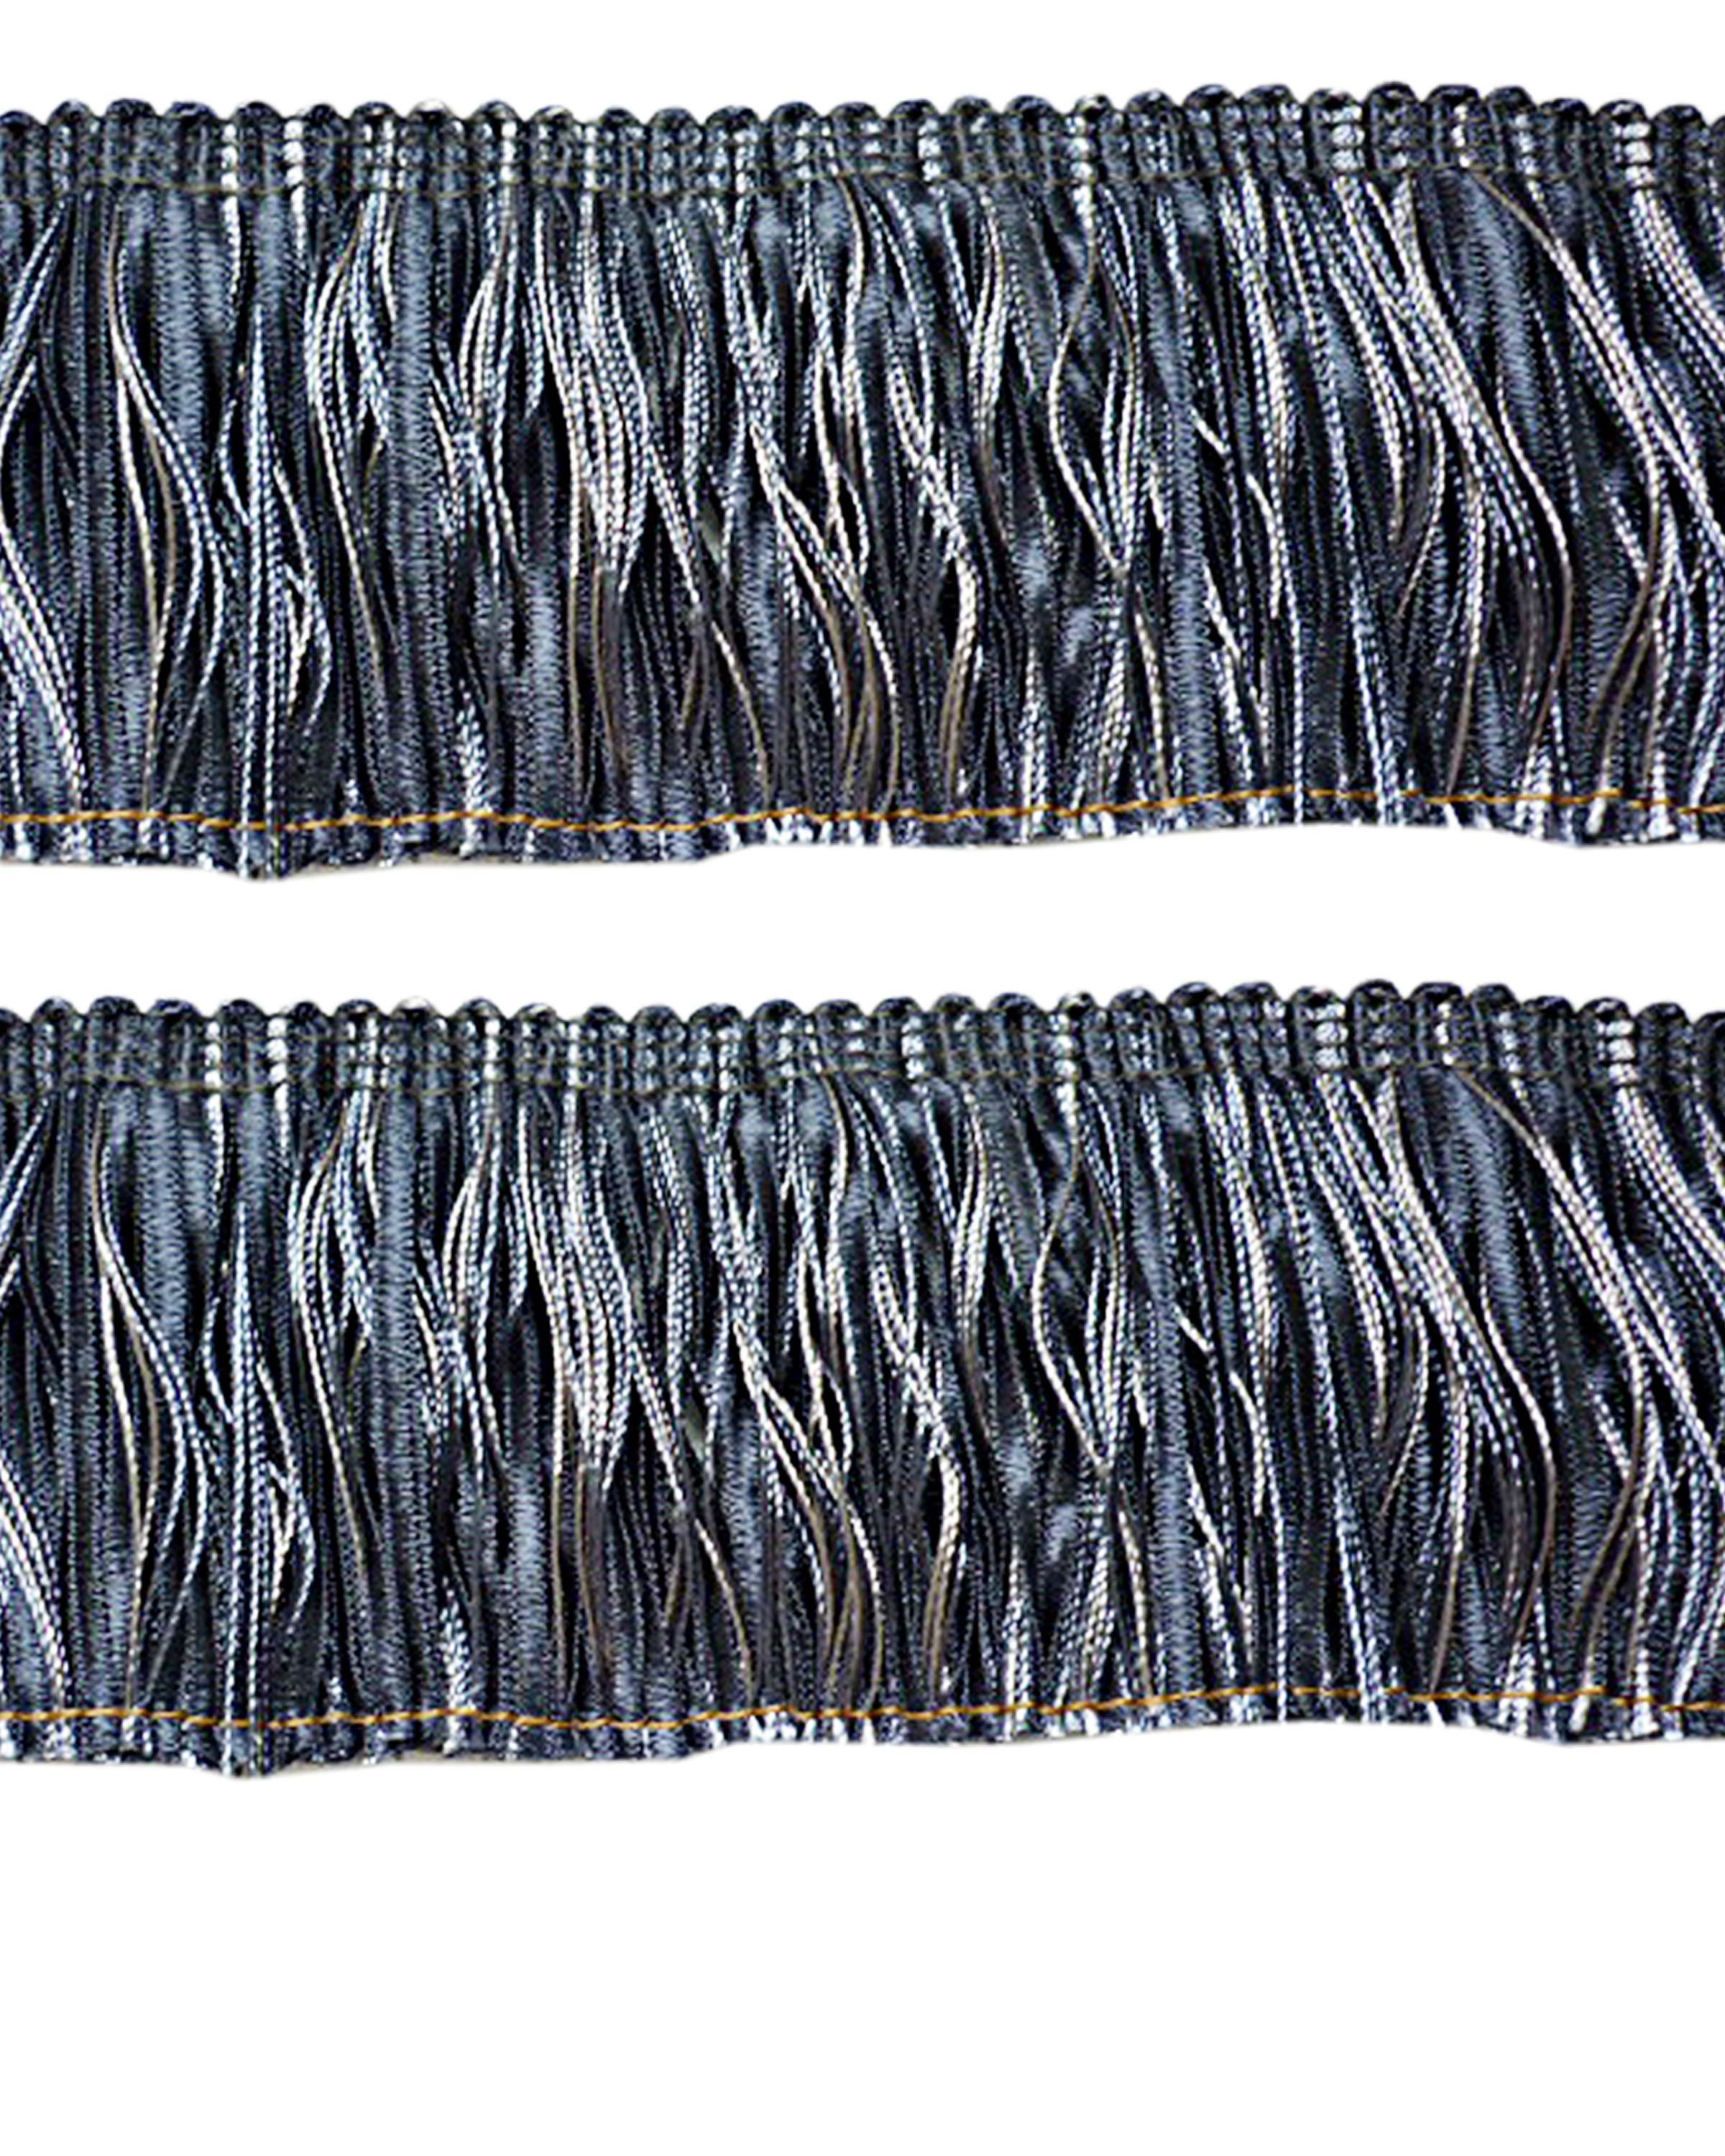 Ruche Fringe with ribbons - Blue 60mm Price is for 5 metres